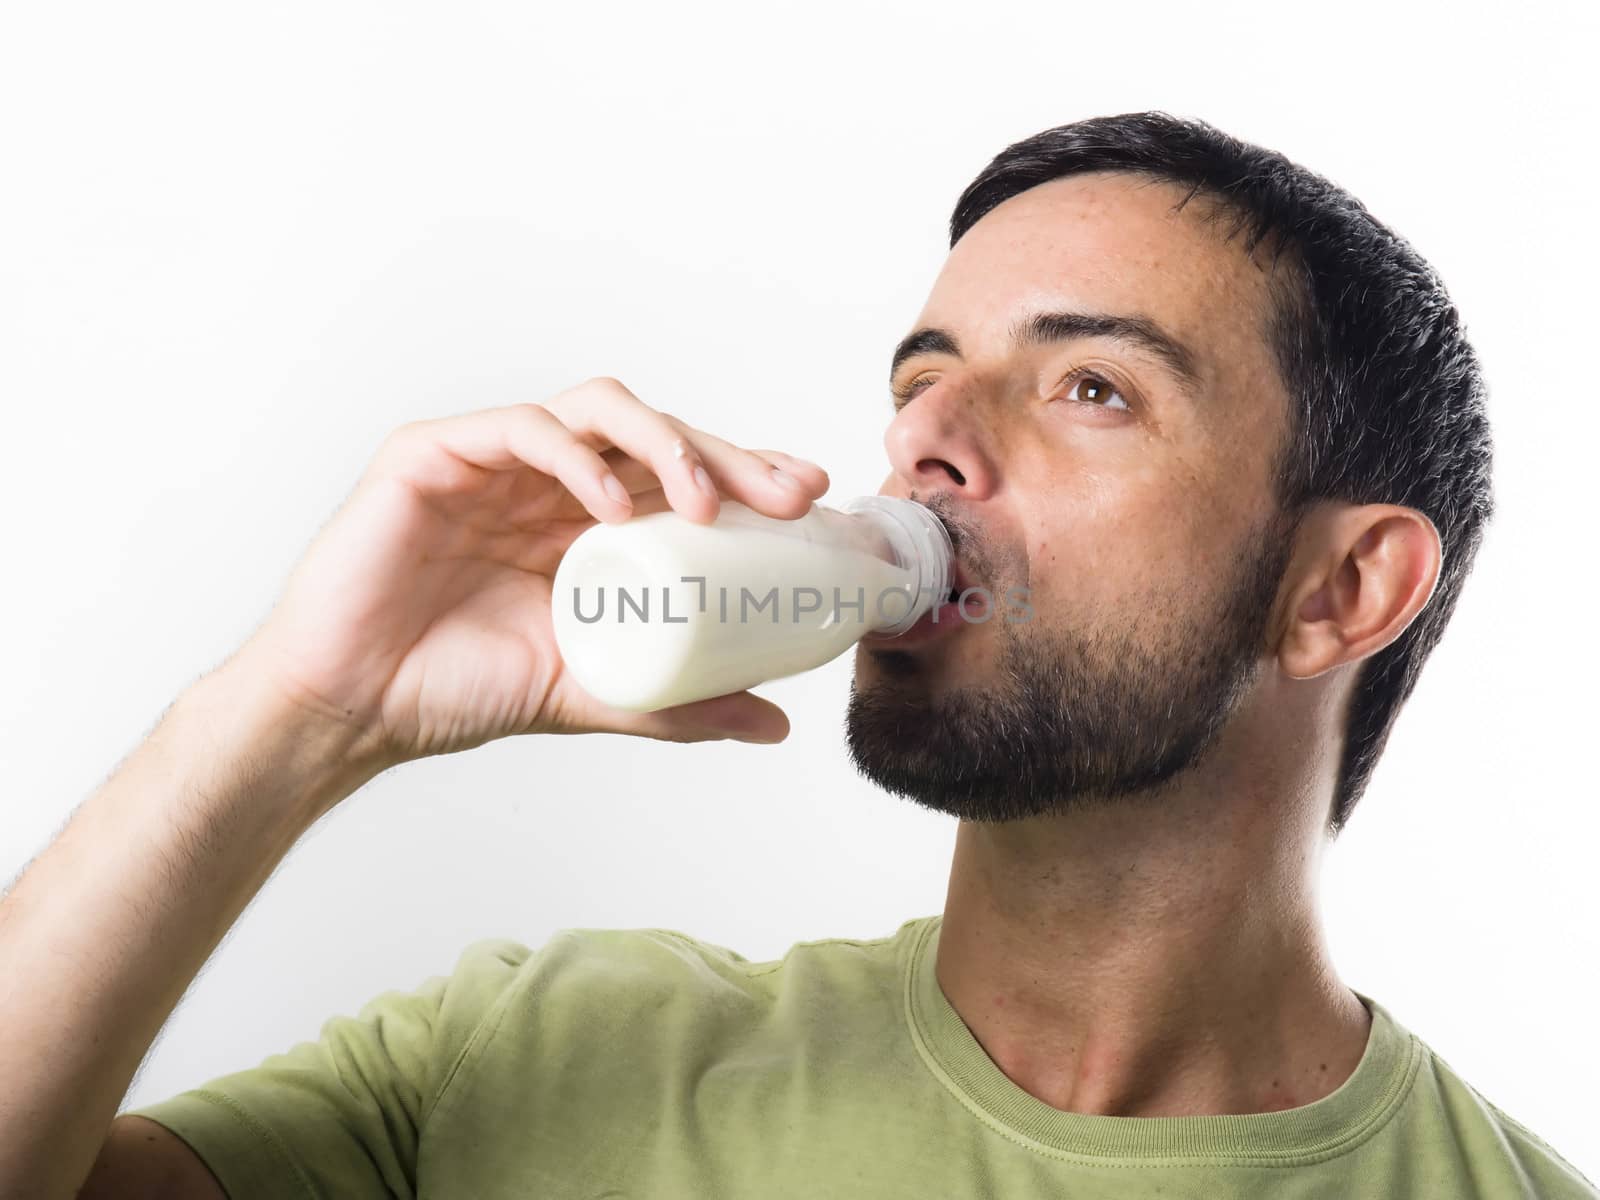 Young Handsome Man with Beard drinking Milk  by ocusfocus